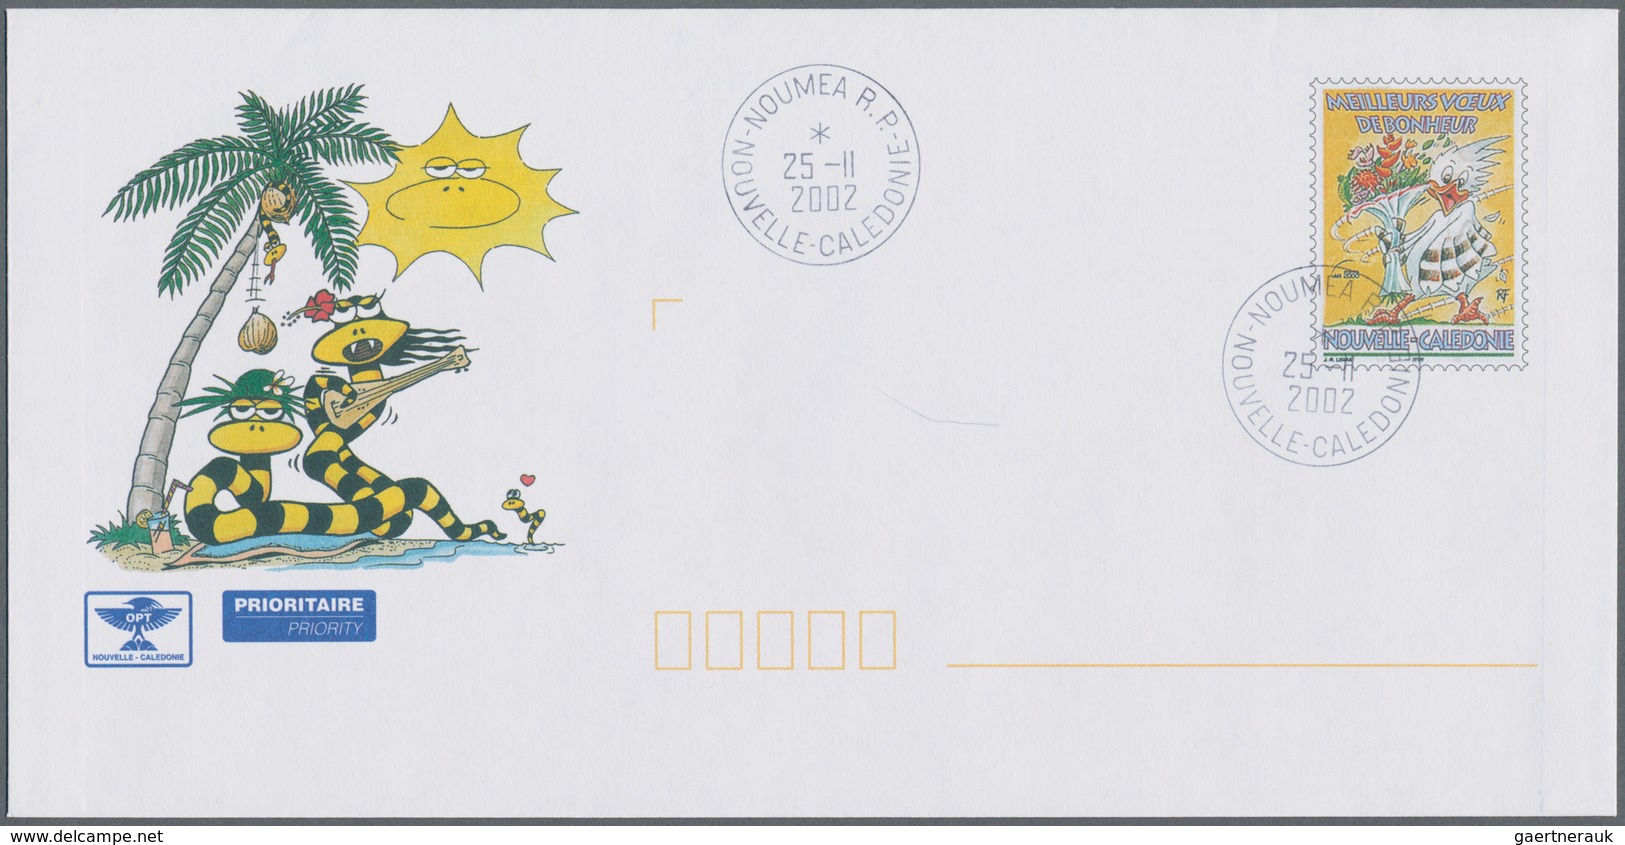 Neukaledonien: 1997/2003 (ca.), accumulation with about 850 PRE-STAMPED ENVELOPES with many differen